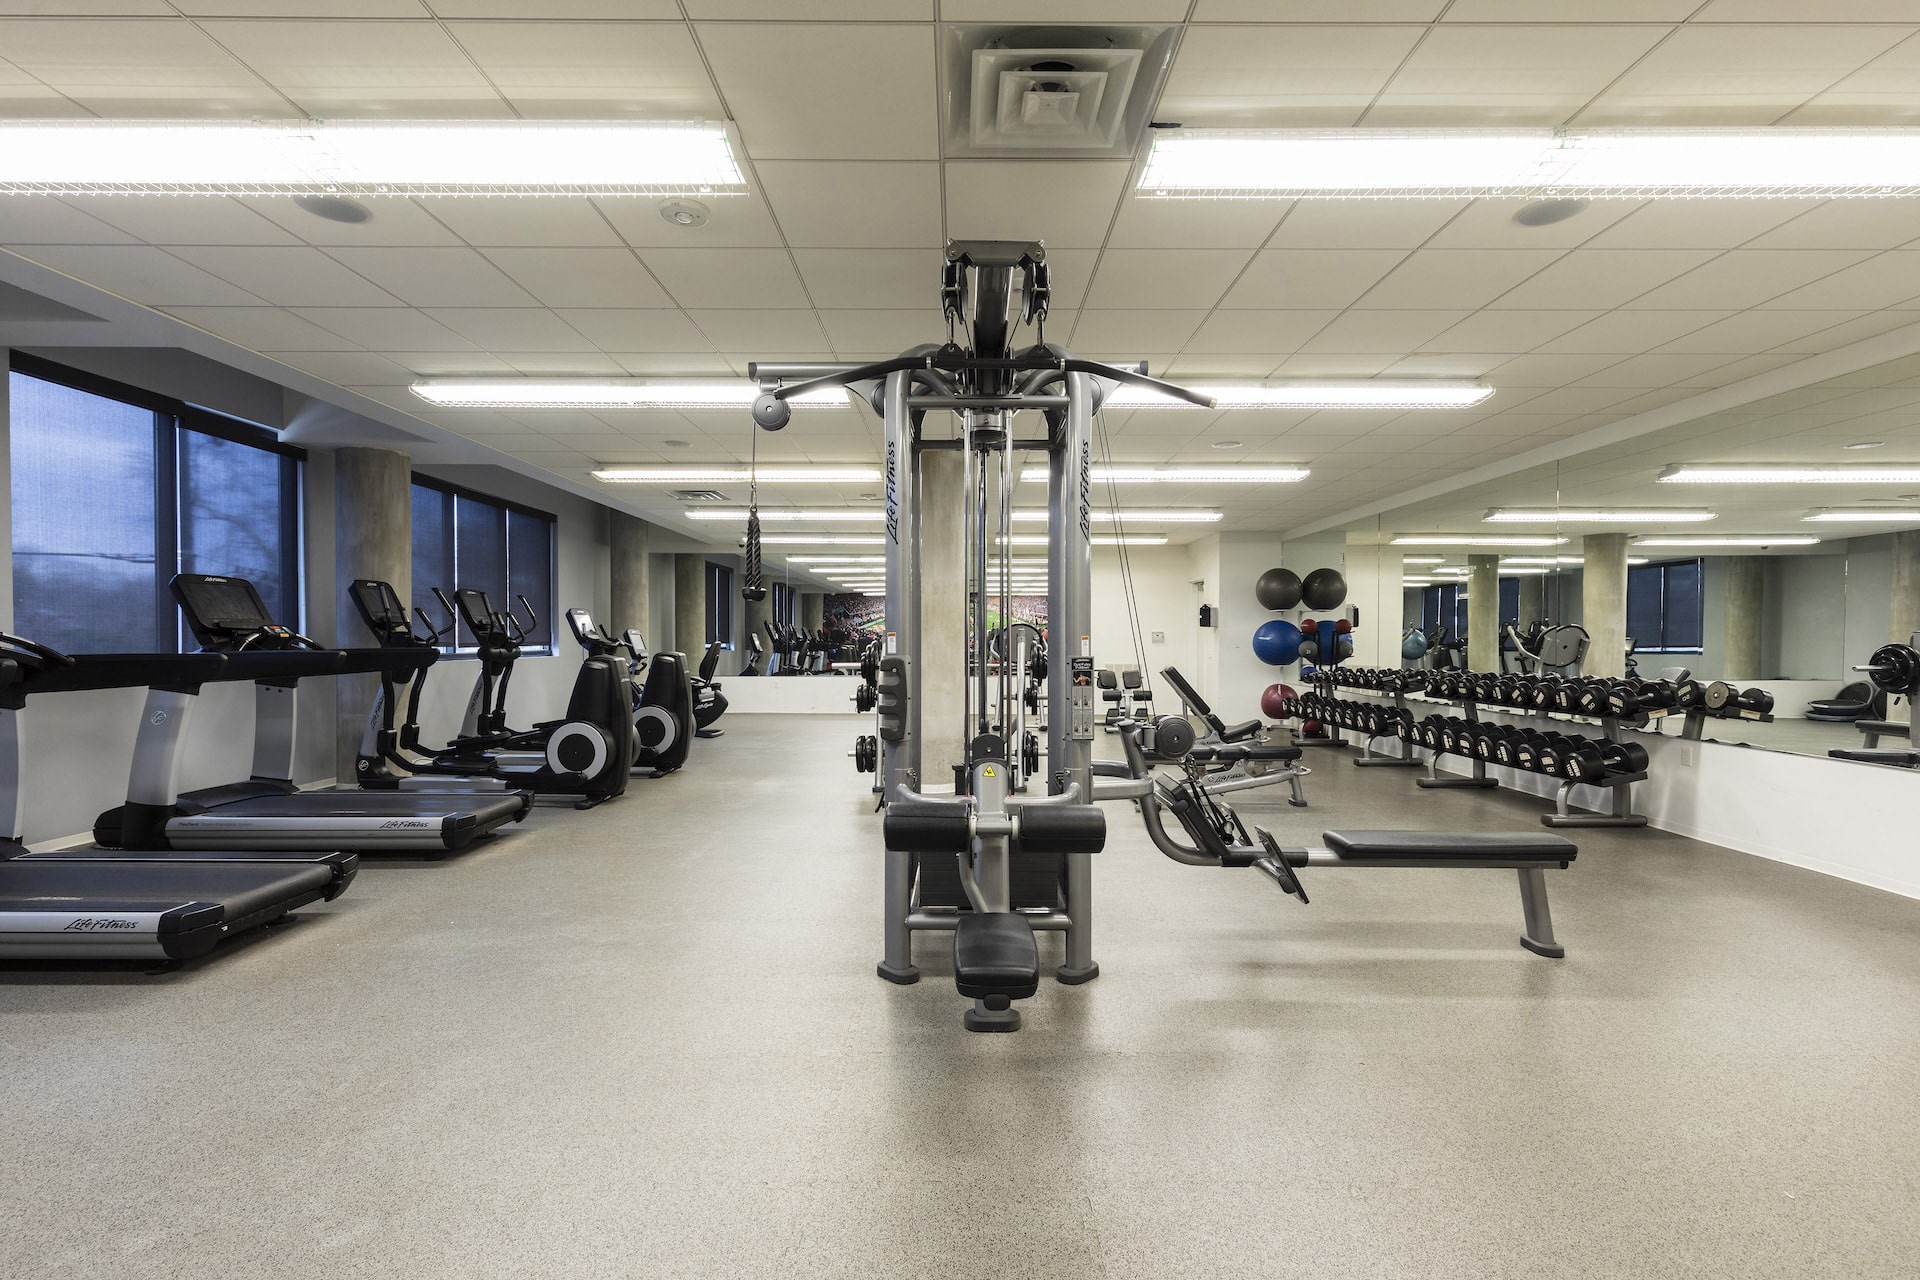 Fitness room with weight lifting machines and dumbbells, treadmills, elliptical machines and sitting bike